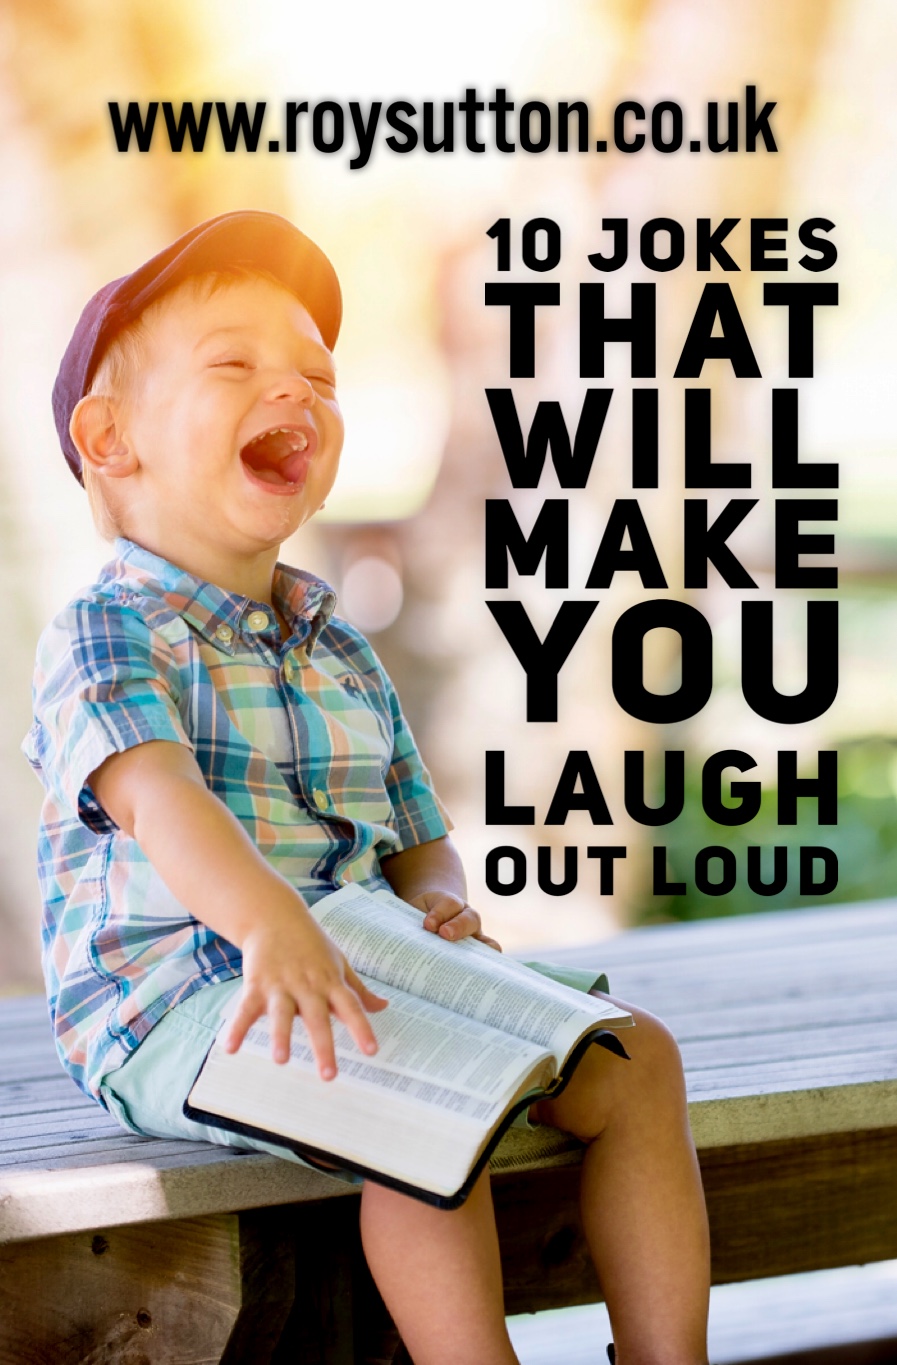 10 jokes that will make you laugh out loud - Roy Sutton